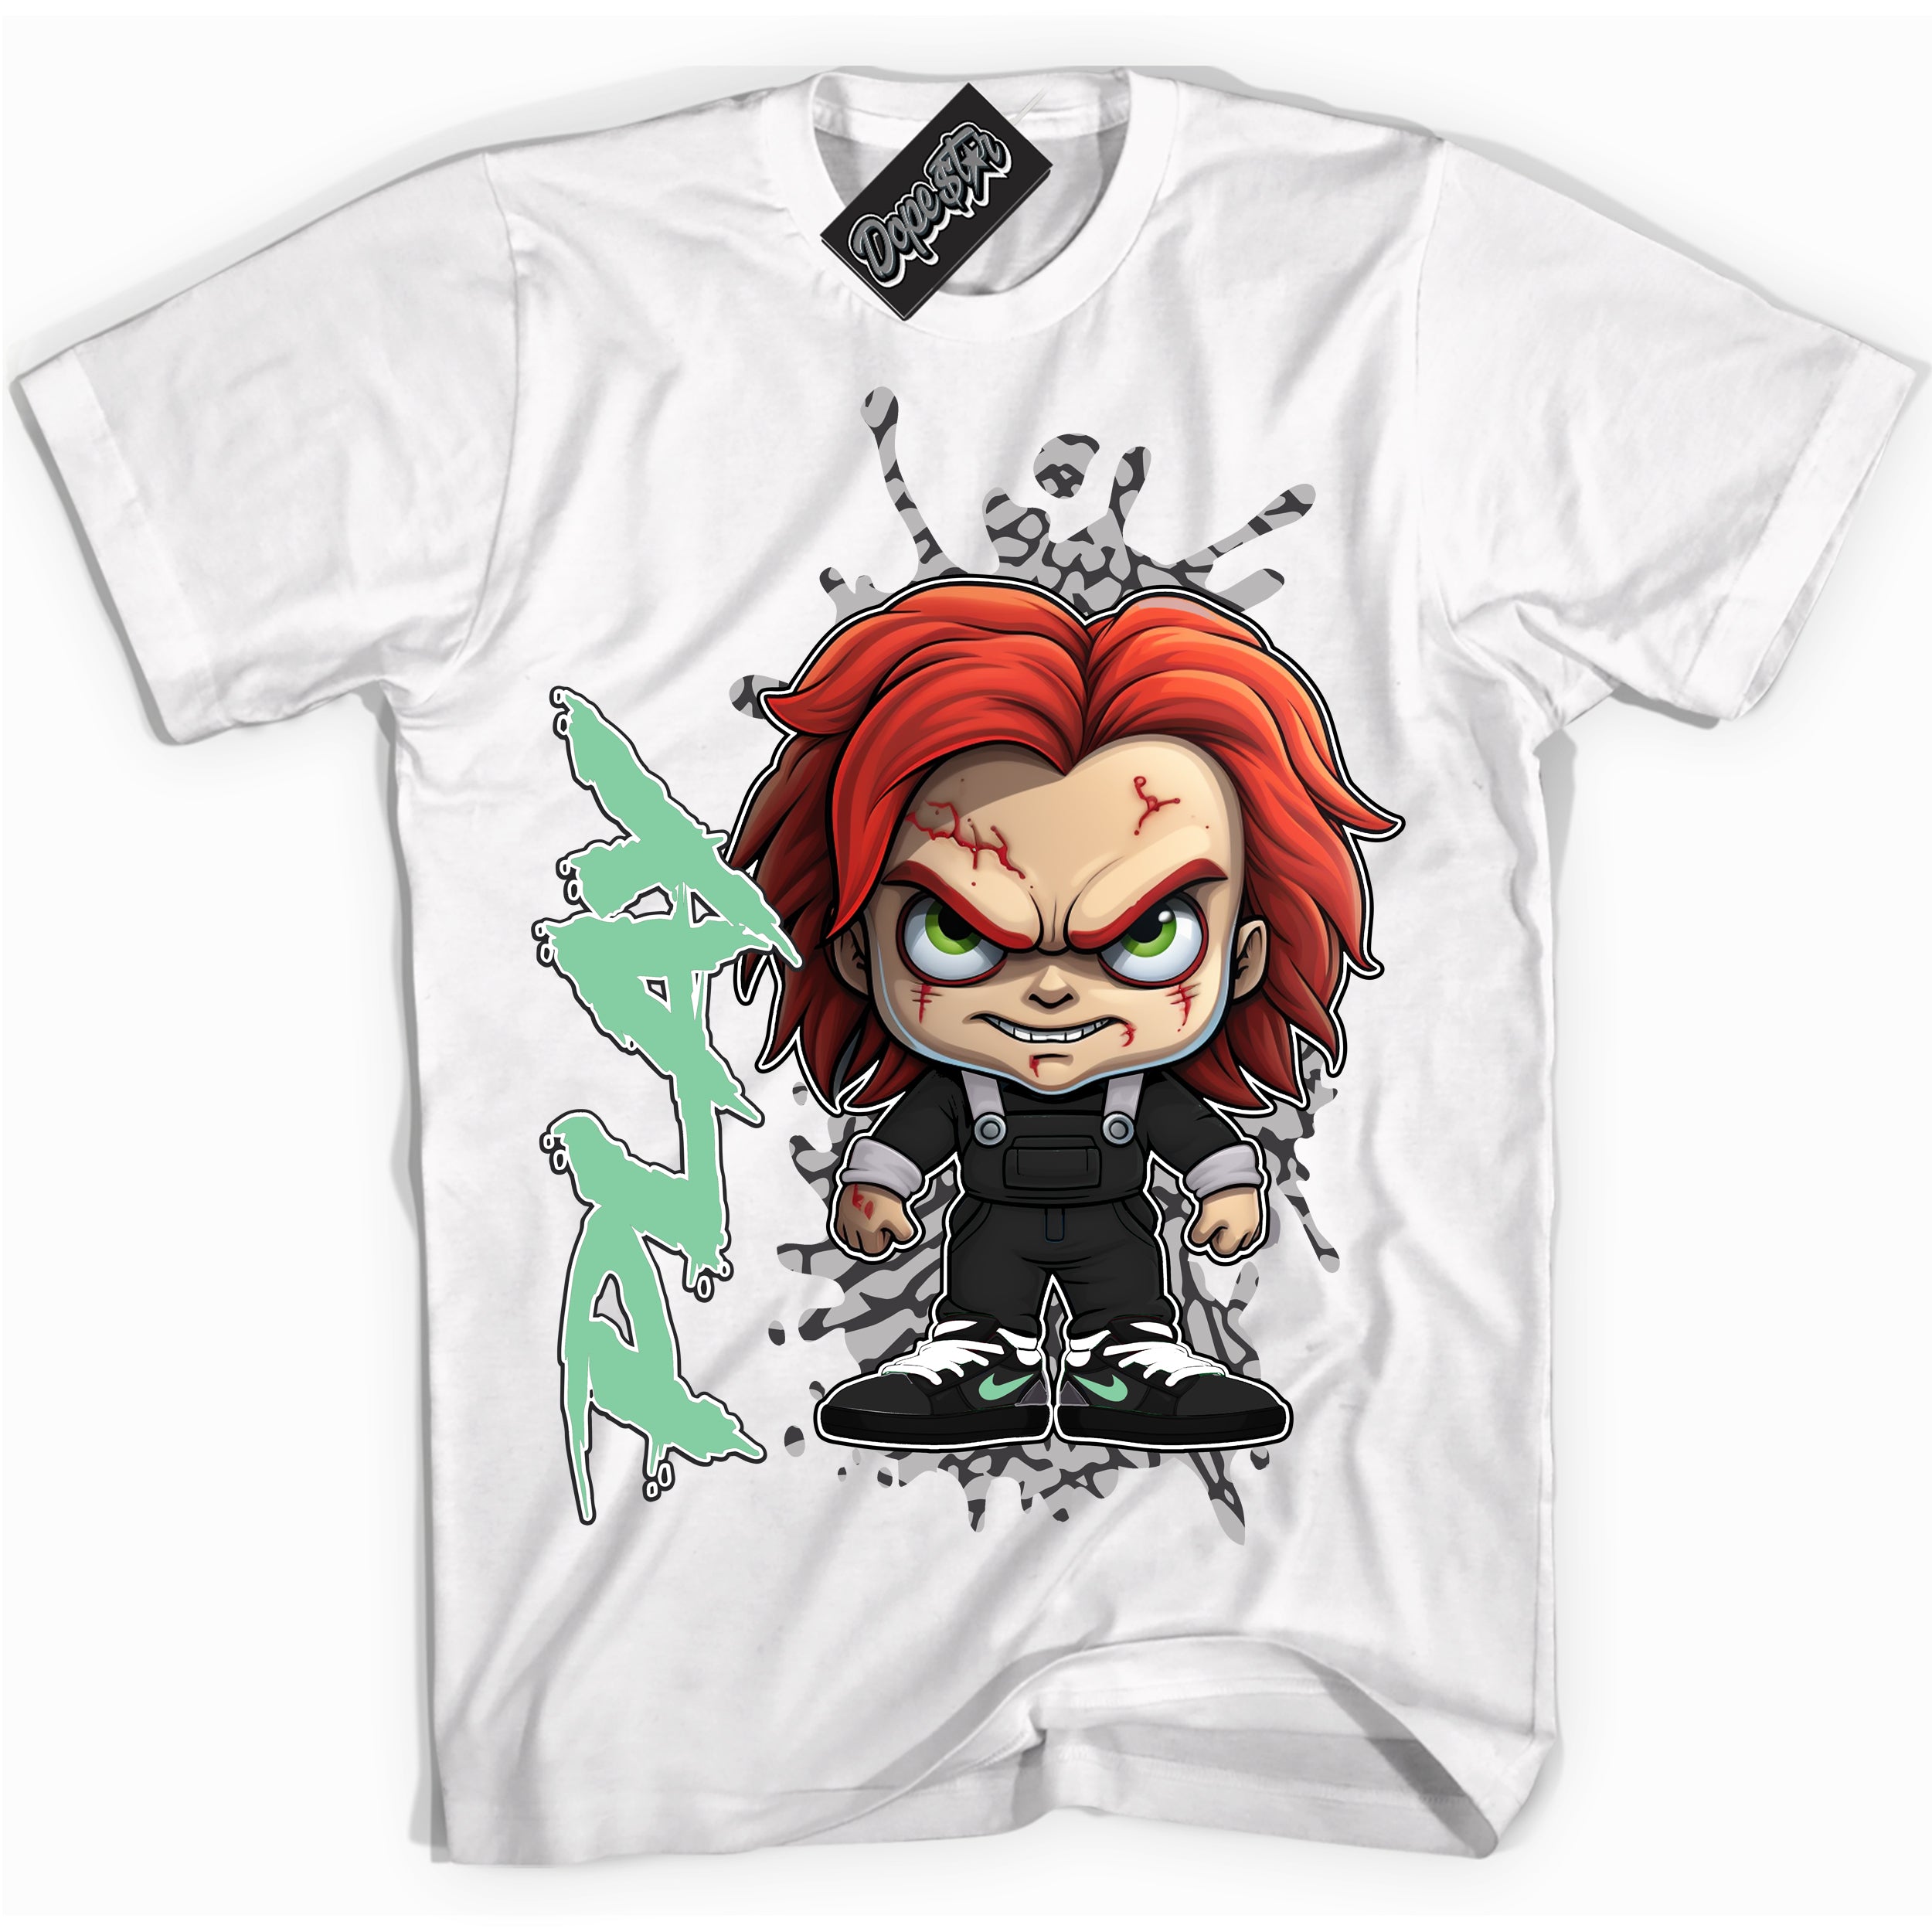 Cool White graphic tee with “ Chucky Play ” design, that perfectly matches Green Glow 3s sneakers 